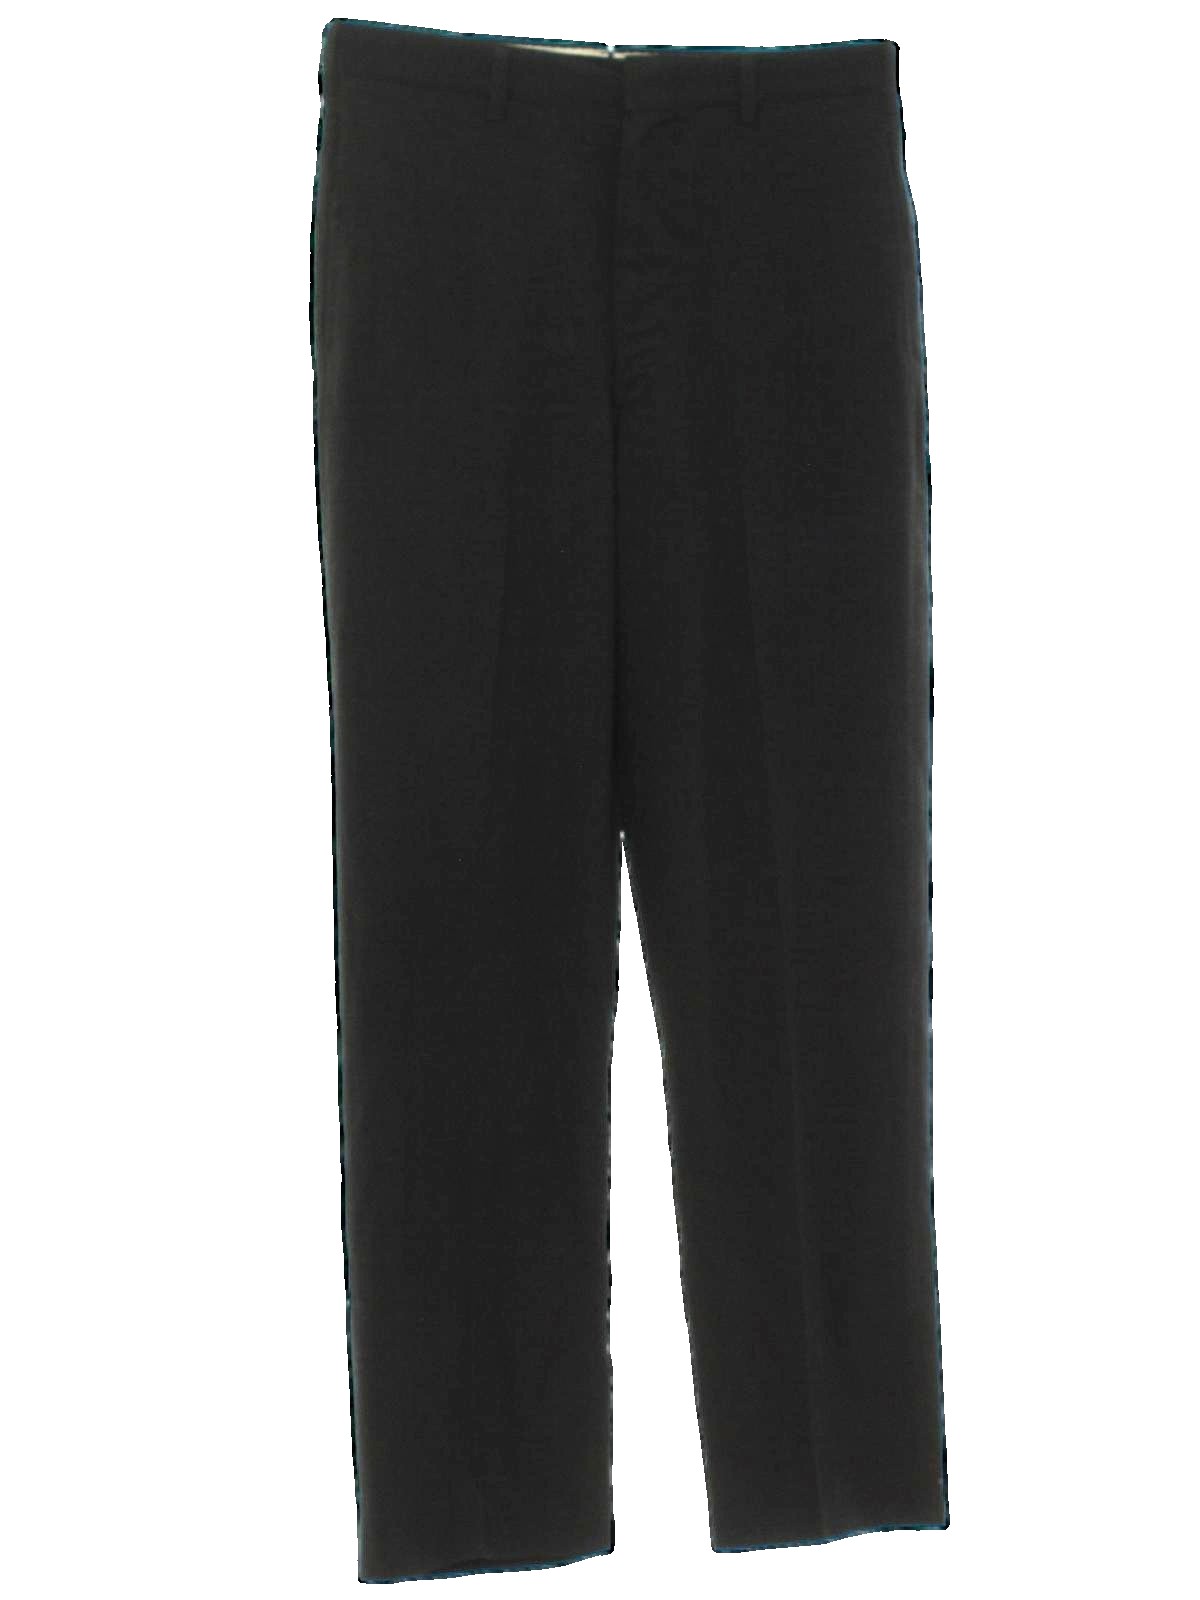 1960's Vintage Pants: 60s -no label- Mens charcoal solid colored wool ...